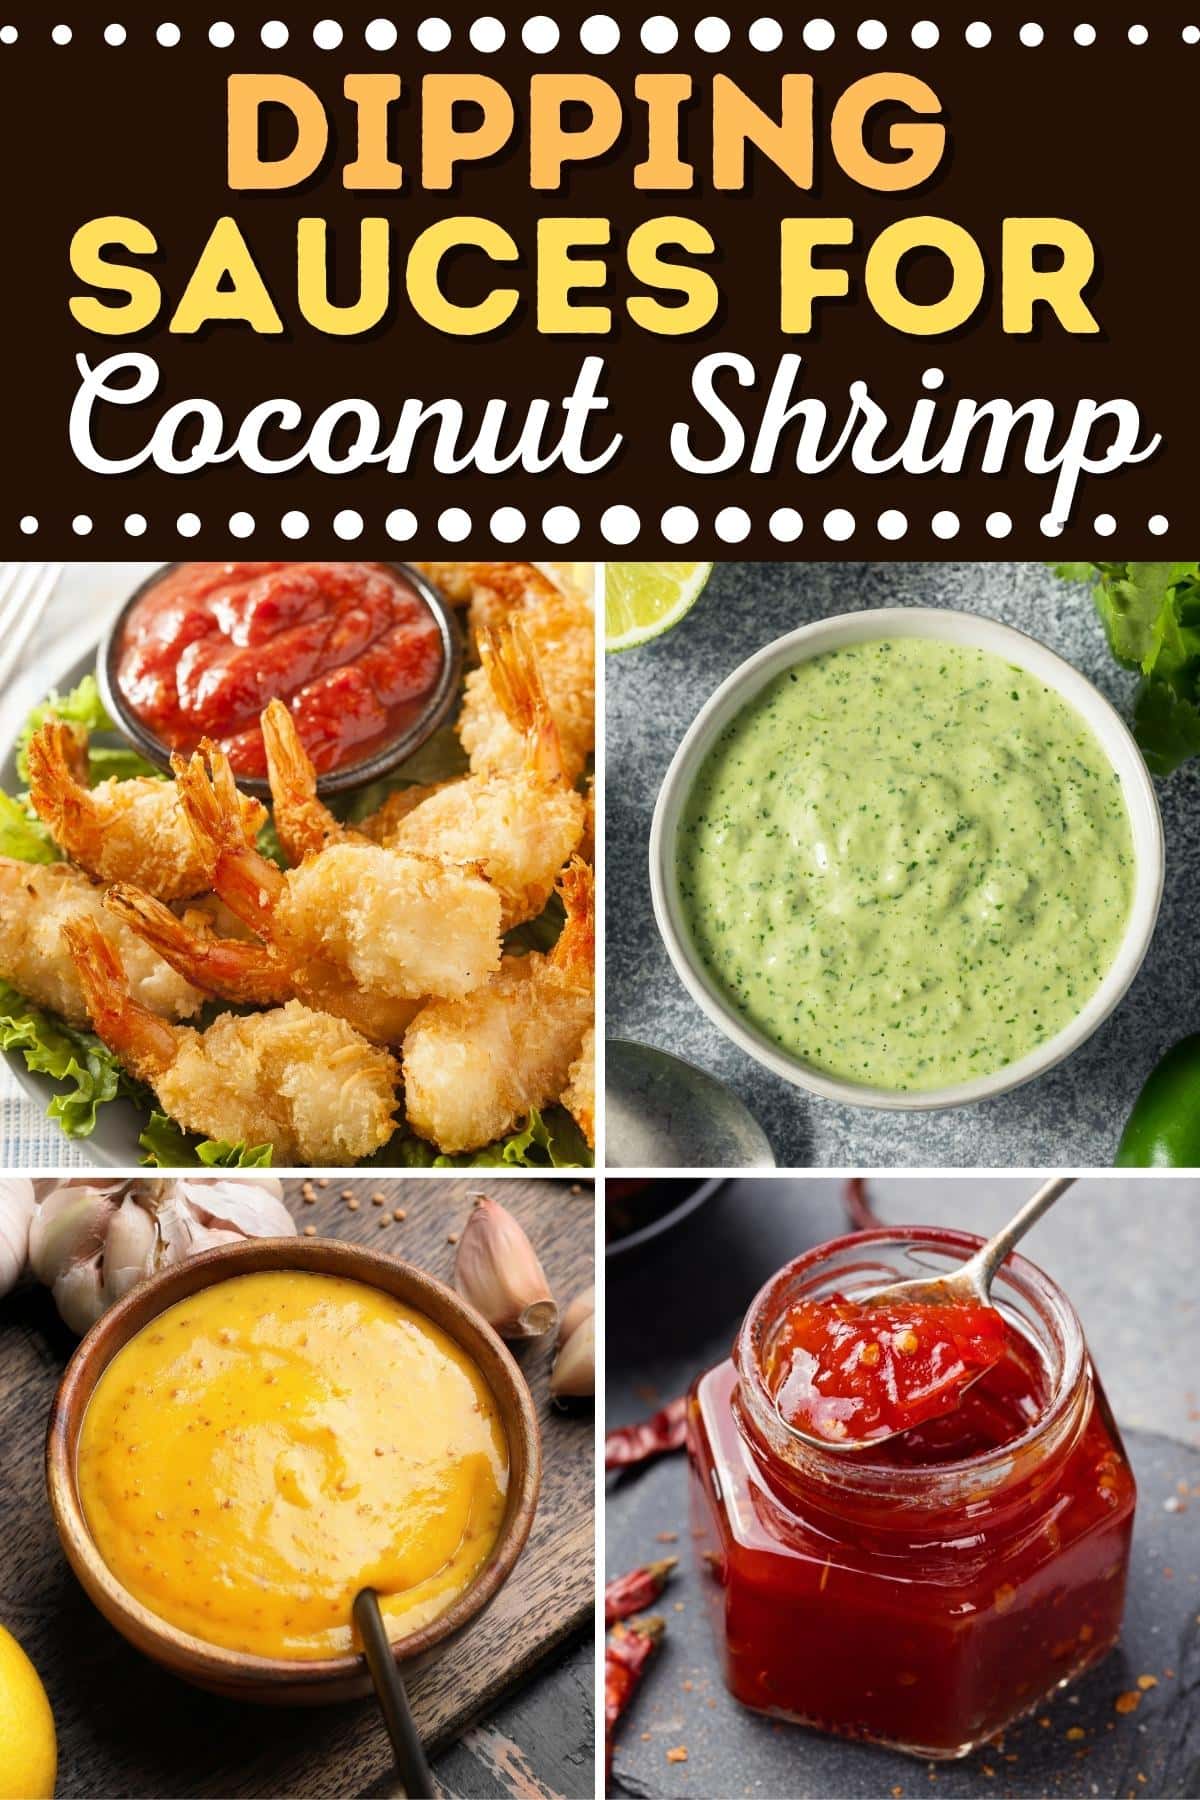 Dipping Sauces for Coconut Shrimp